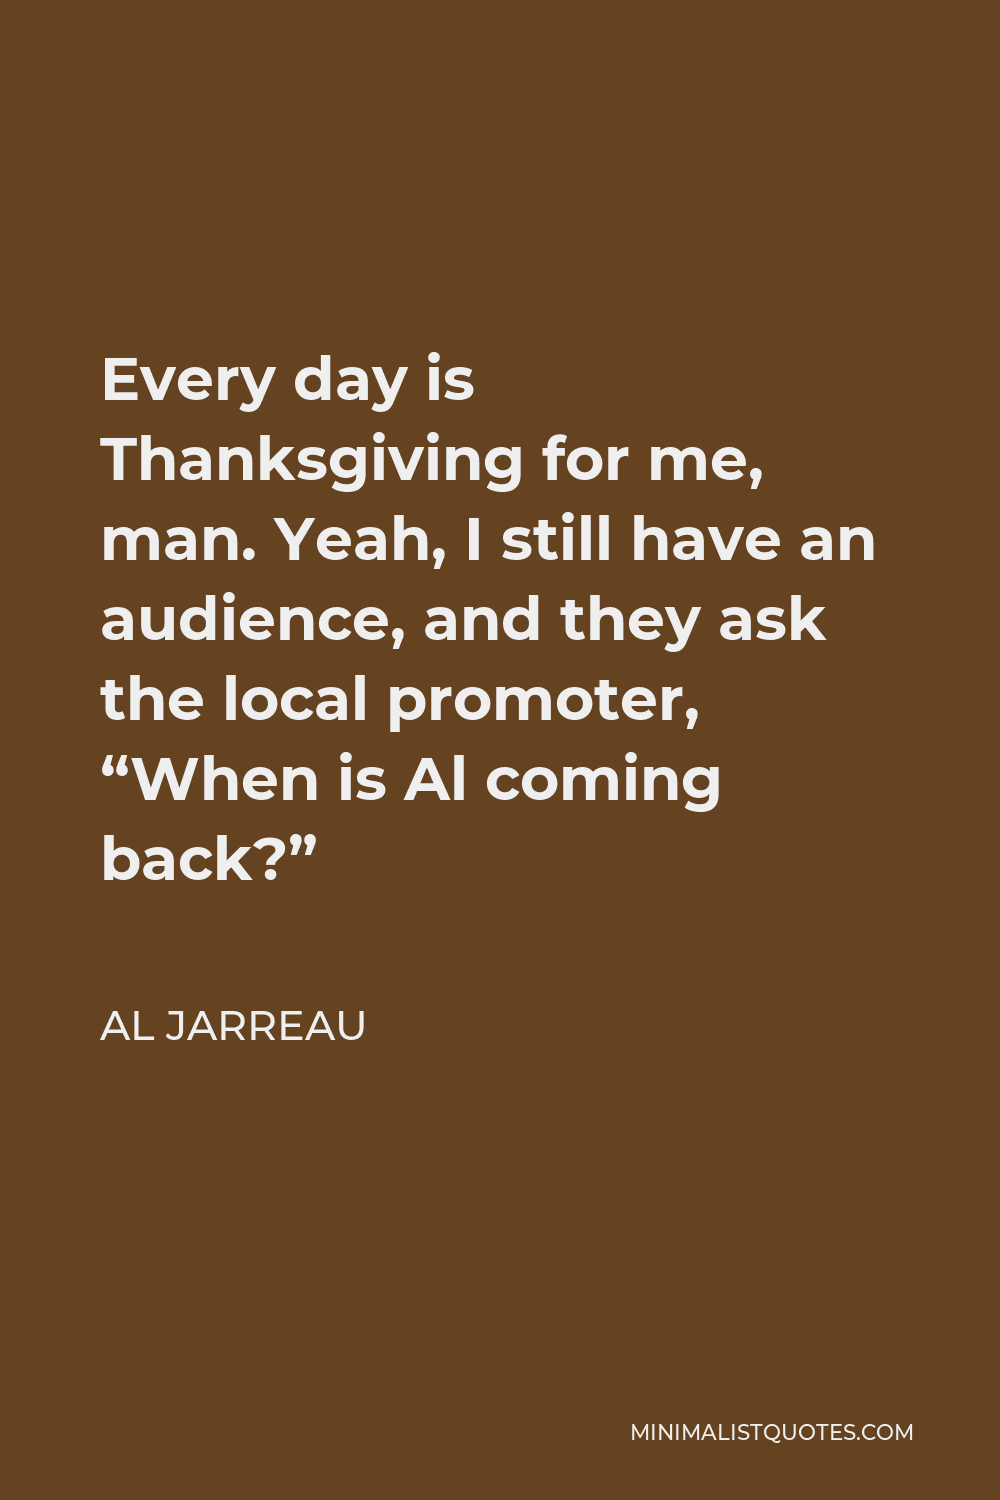 Al Jarreau Quote - Every day is Thanksgiving for me, man. Yeah, I still have an audience, and they ask the local promoter, “When is Al coming back?”